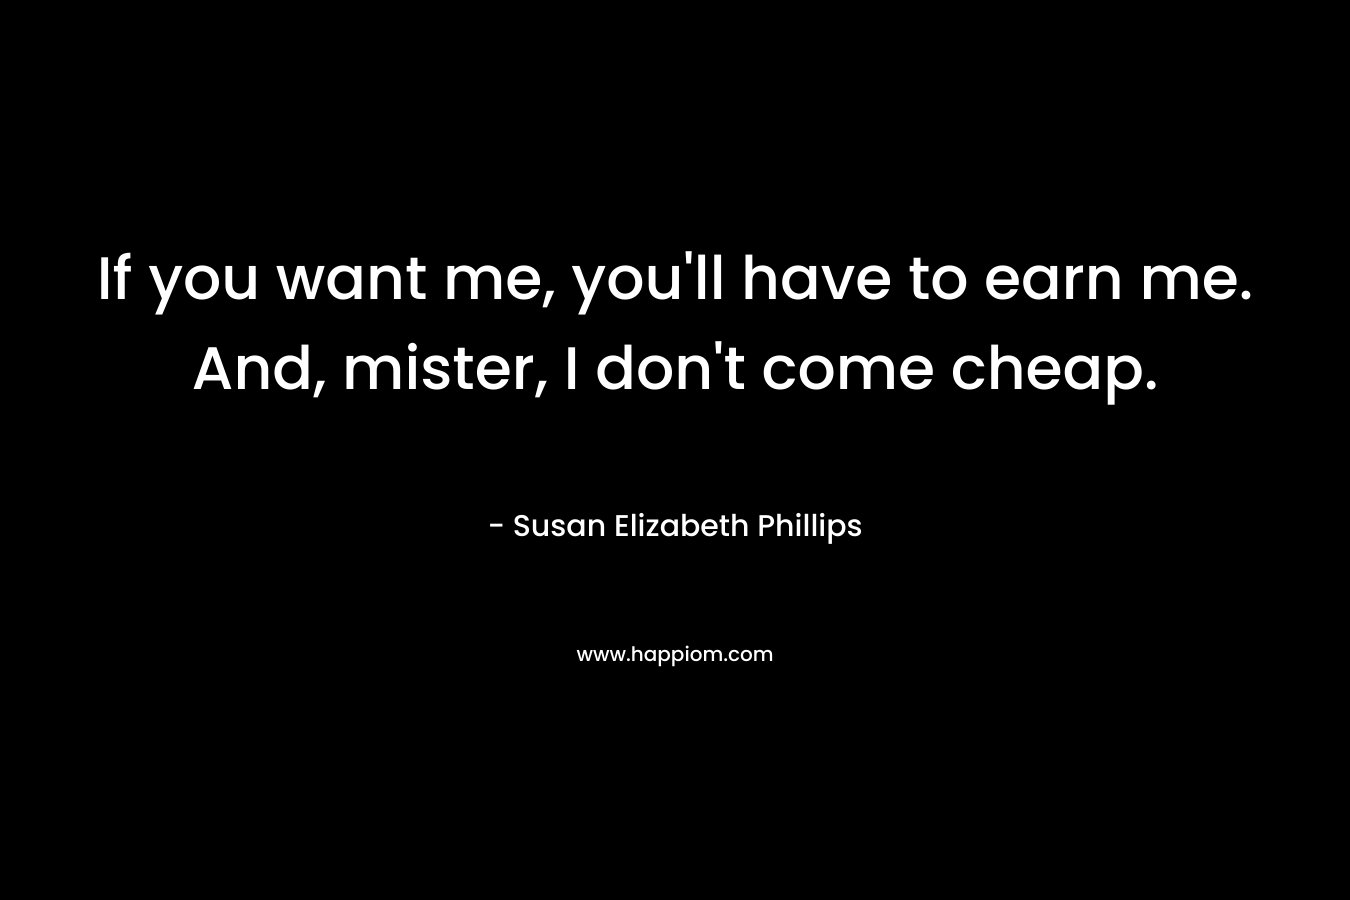 If you want me, you’ll have to earn me. And, mister, I don’t come cheap. – Susan Elizabeth Phillips